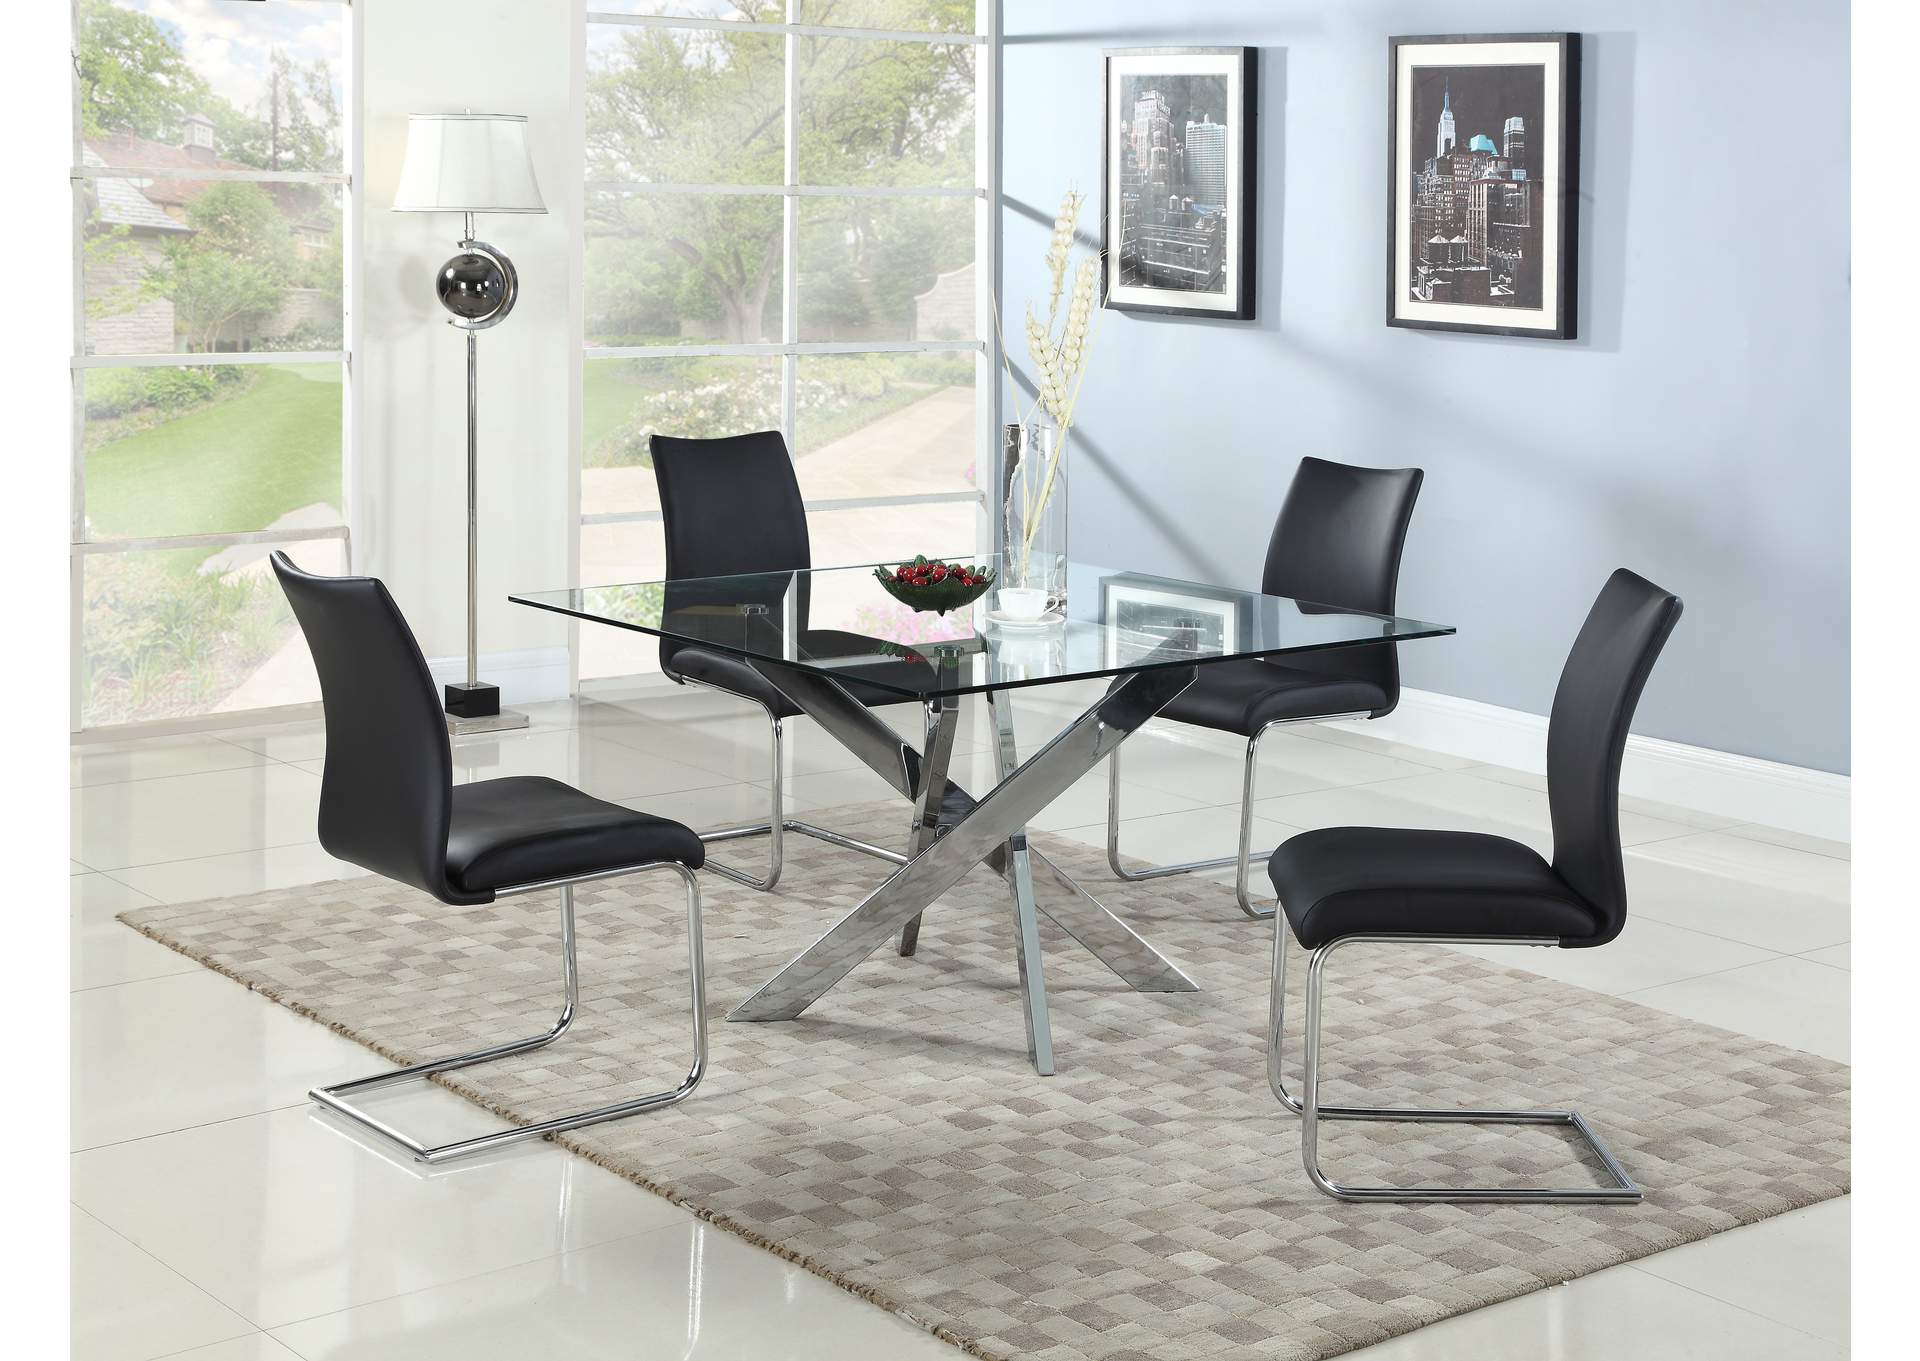 Dining Set w/ Glass Top Table & 4 Cantilever Side Chairs,Chintaly Imports